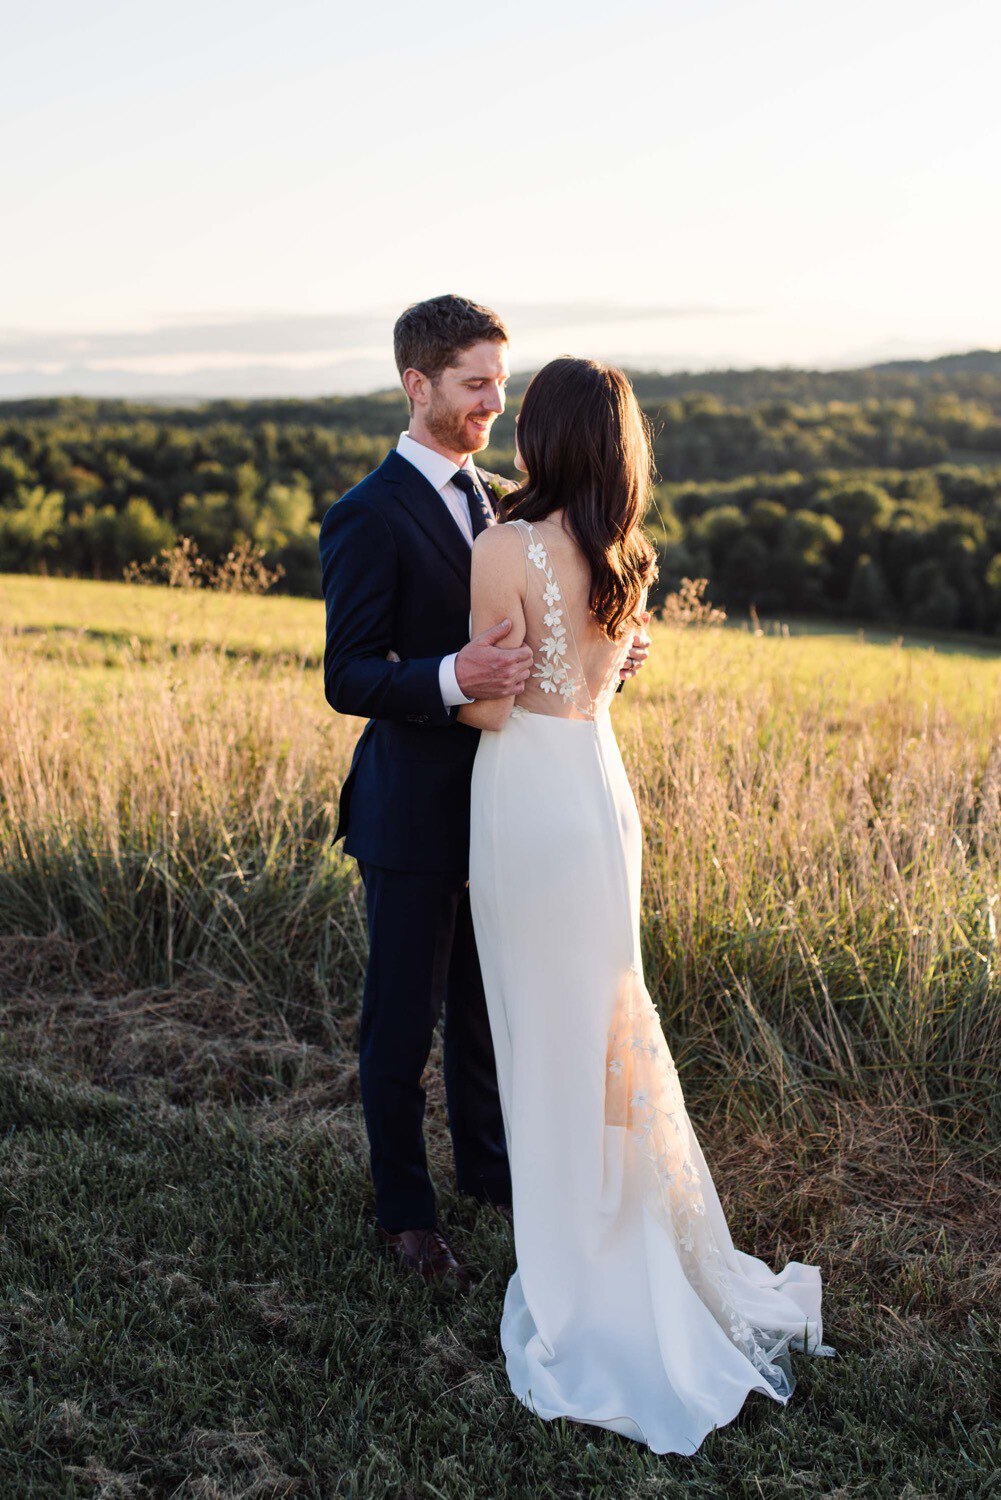 Bride and groom embrace at sunset overlooking Adirondacks in Alexandra Grecco gown